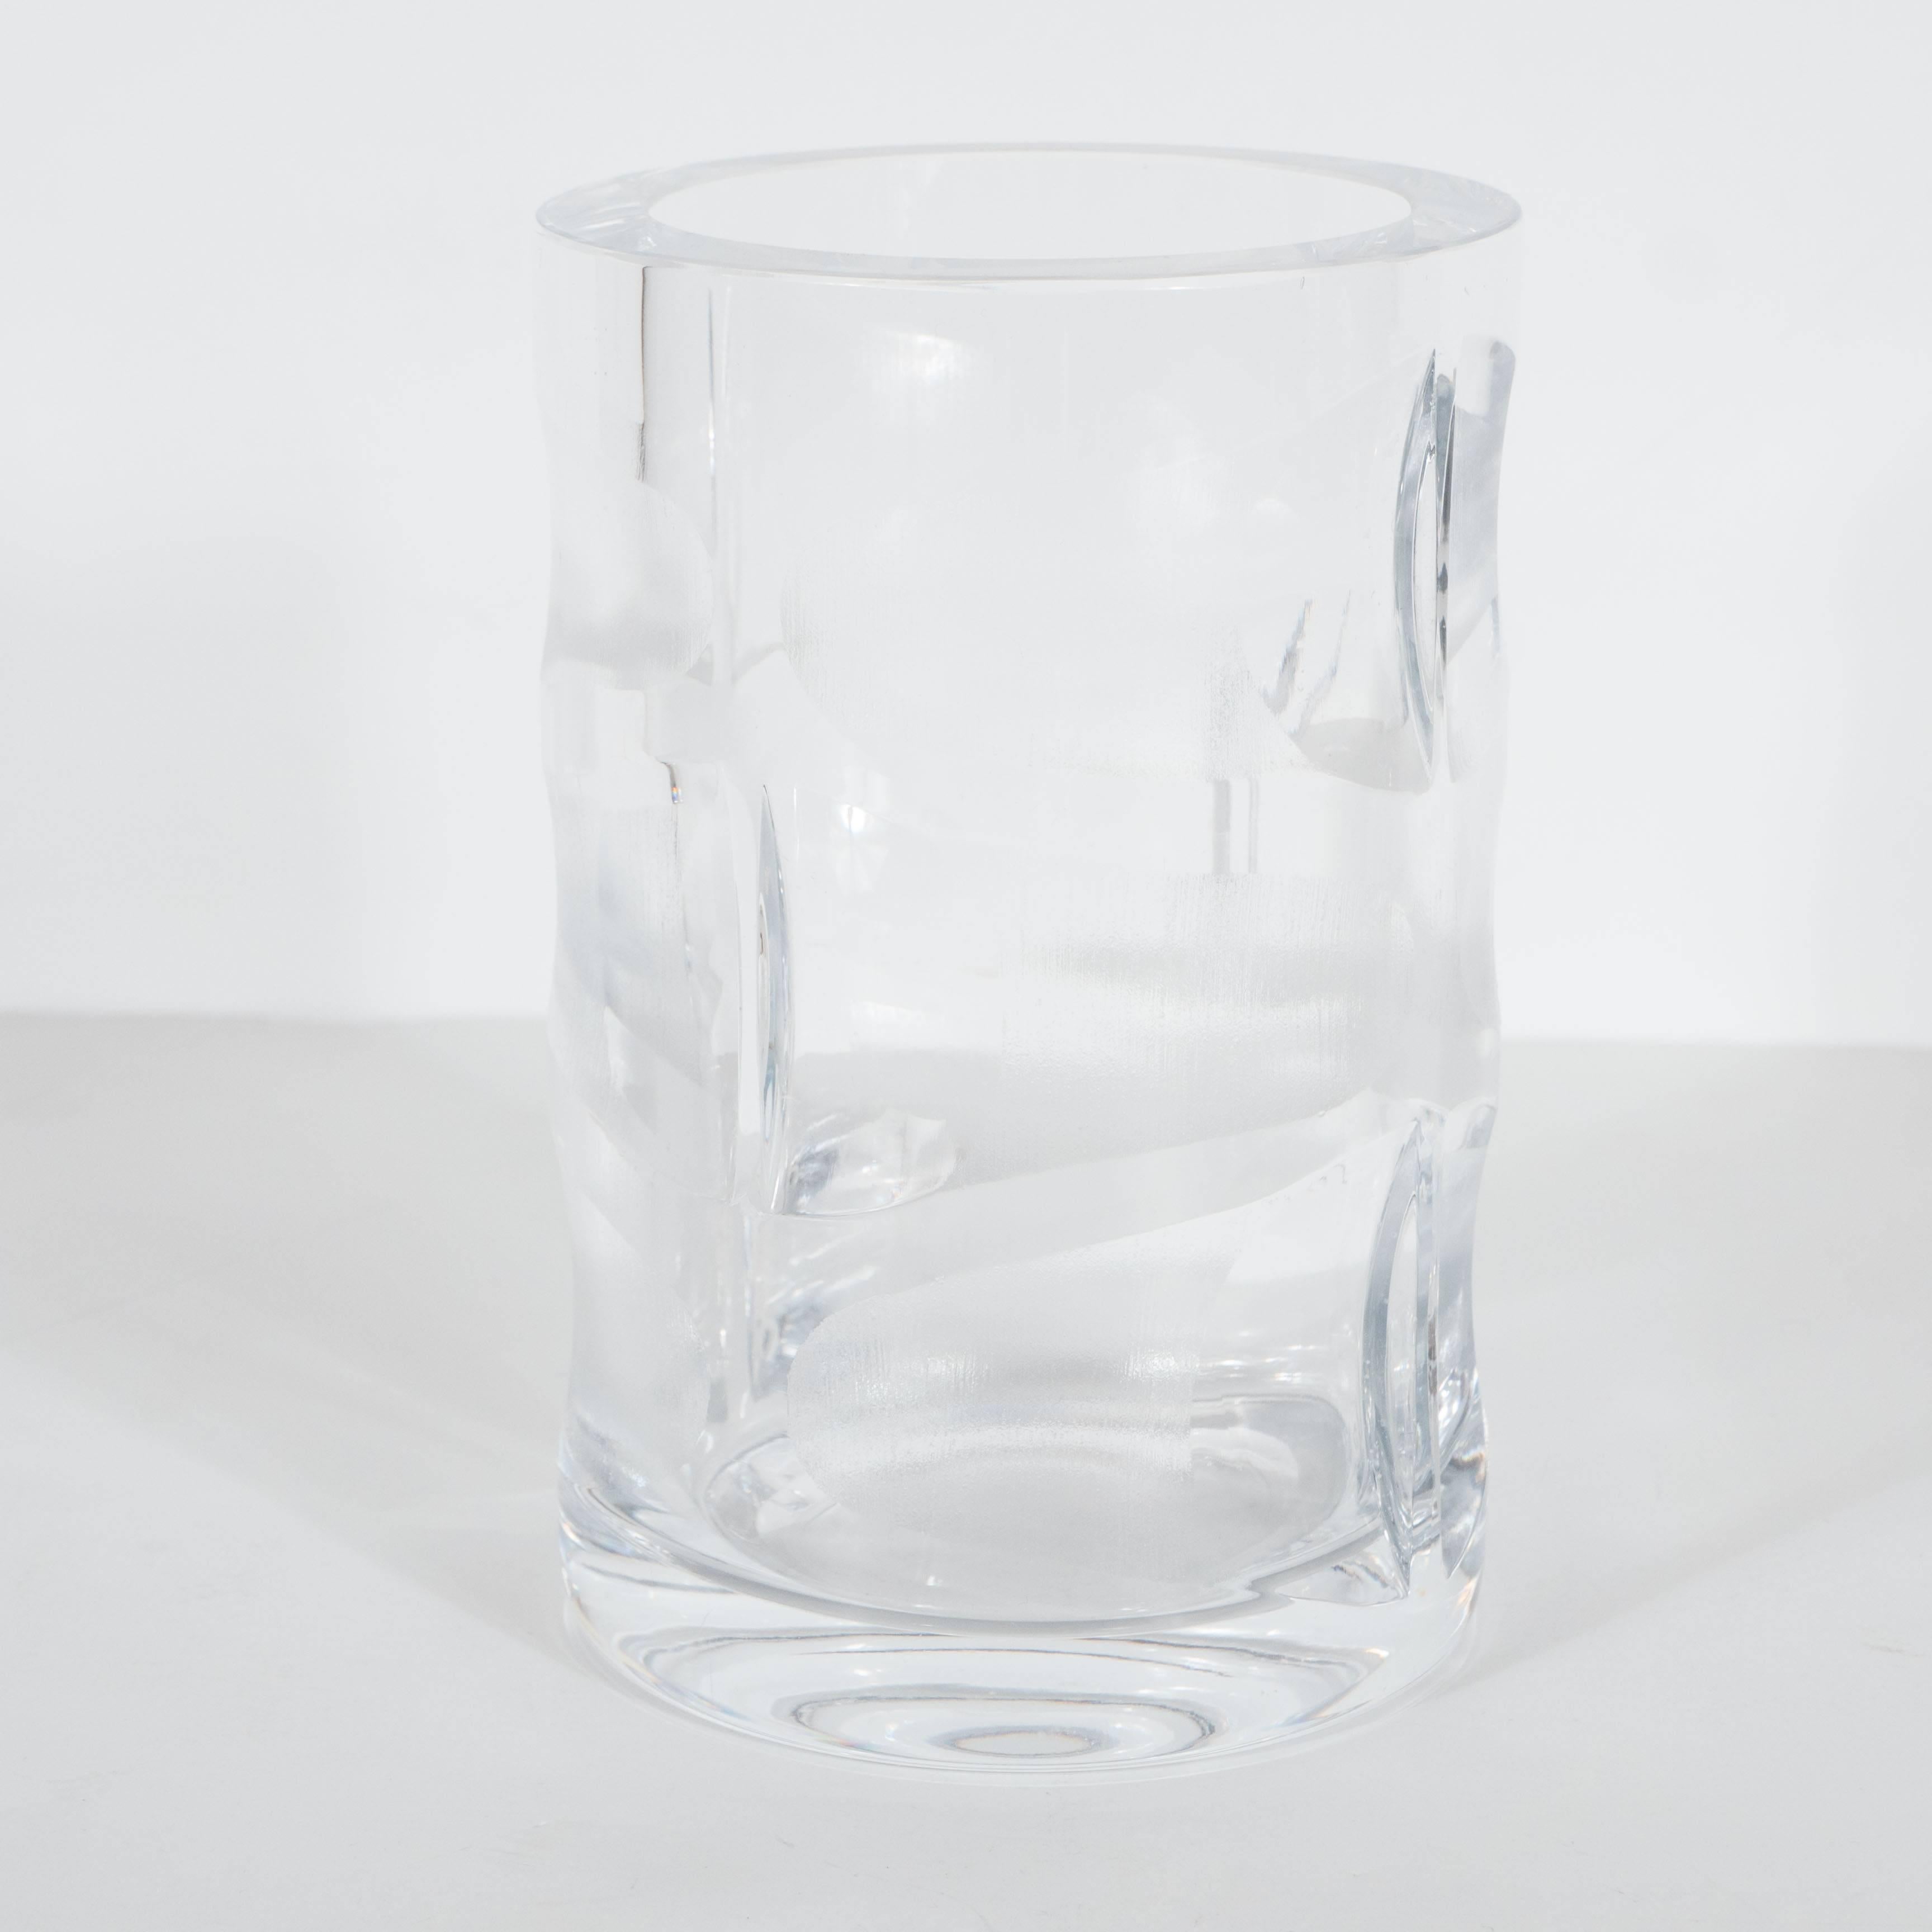 
This Mid-Century Modernist crystal vase in clear glass features geometric designs in clear and etched glass. It was realized, circa 1970, in the style of Orrefors of Sweden. Photographs do not do the subtle finishes of this sophisticated vase